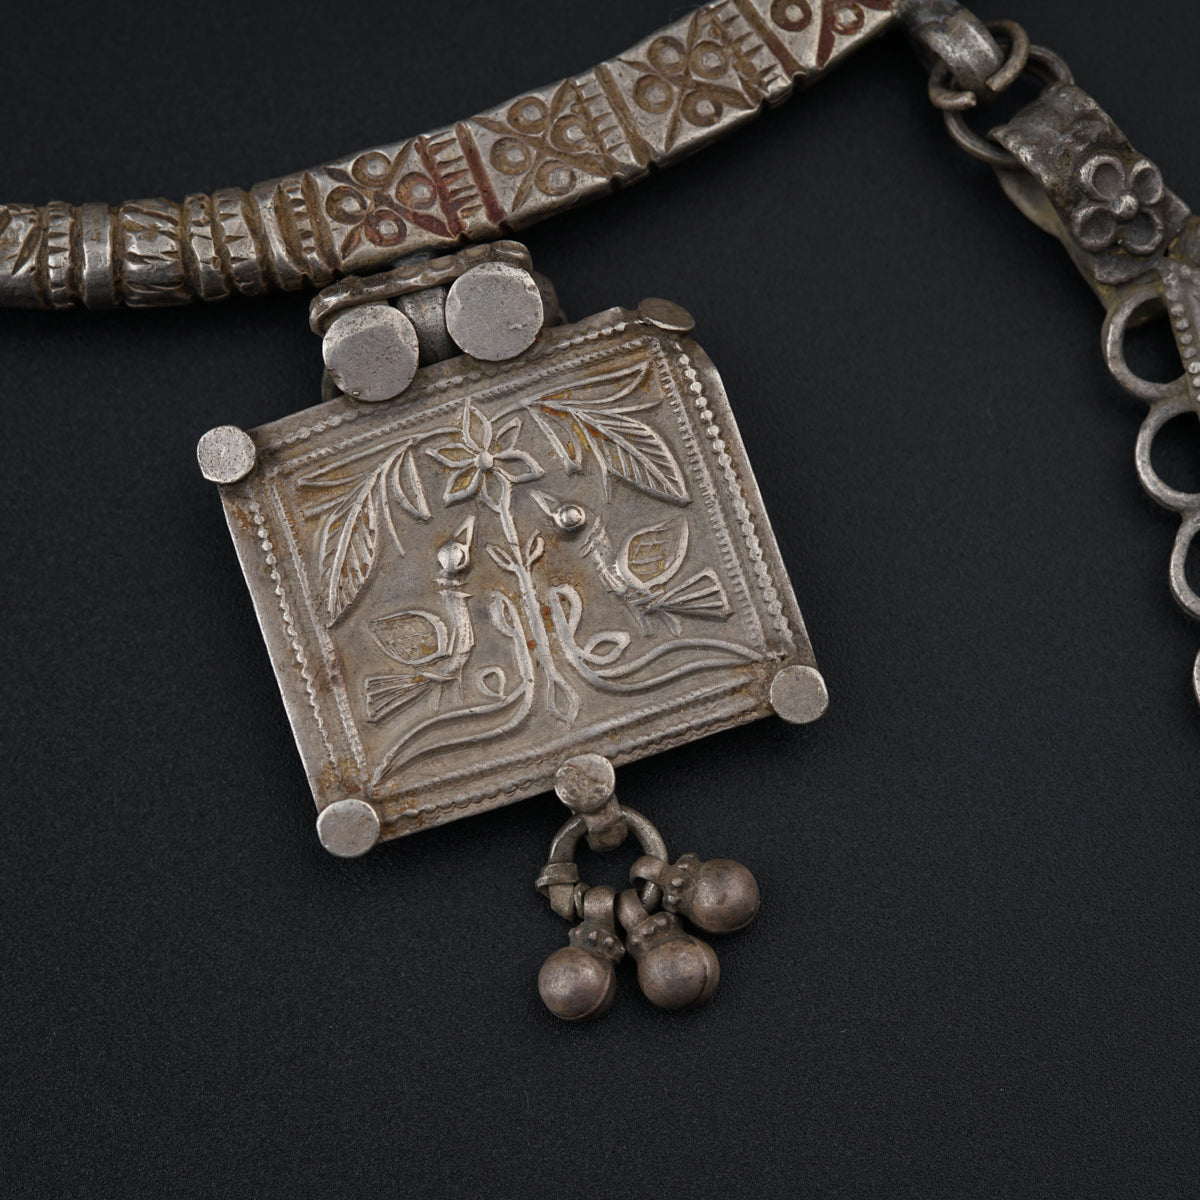 Antique Silver गळसरी (Galsaree) with Pendant